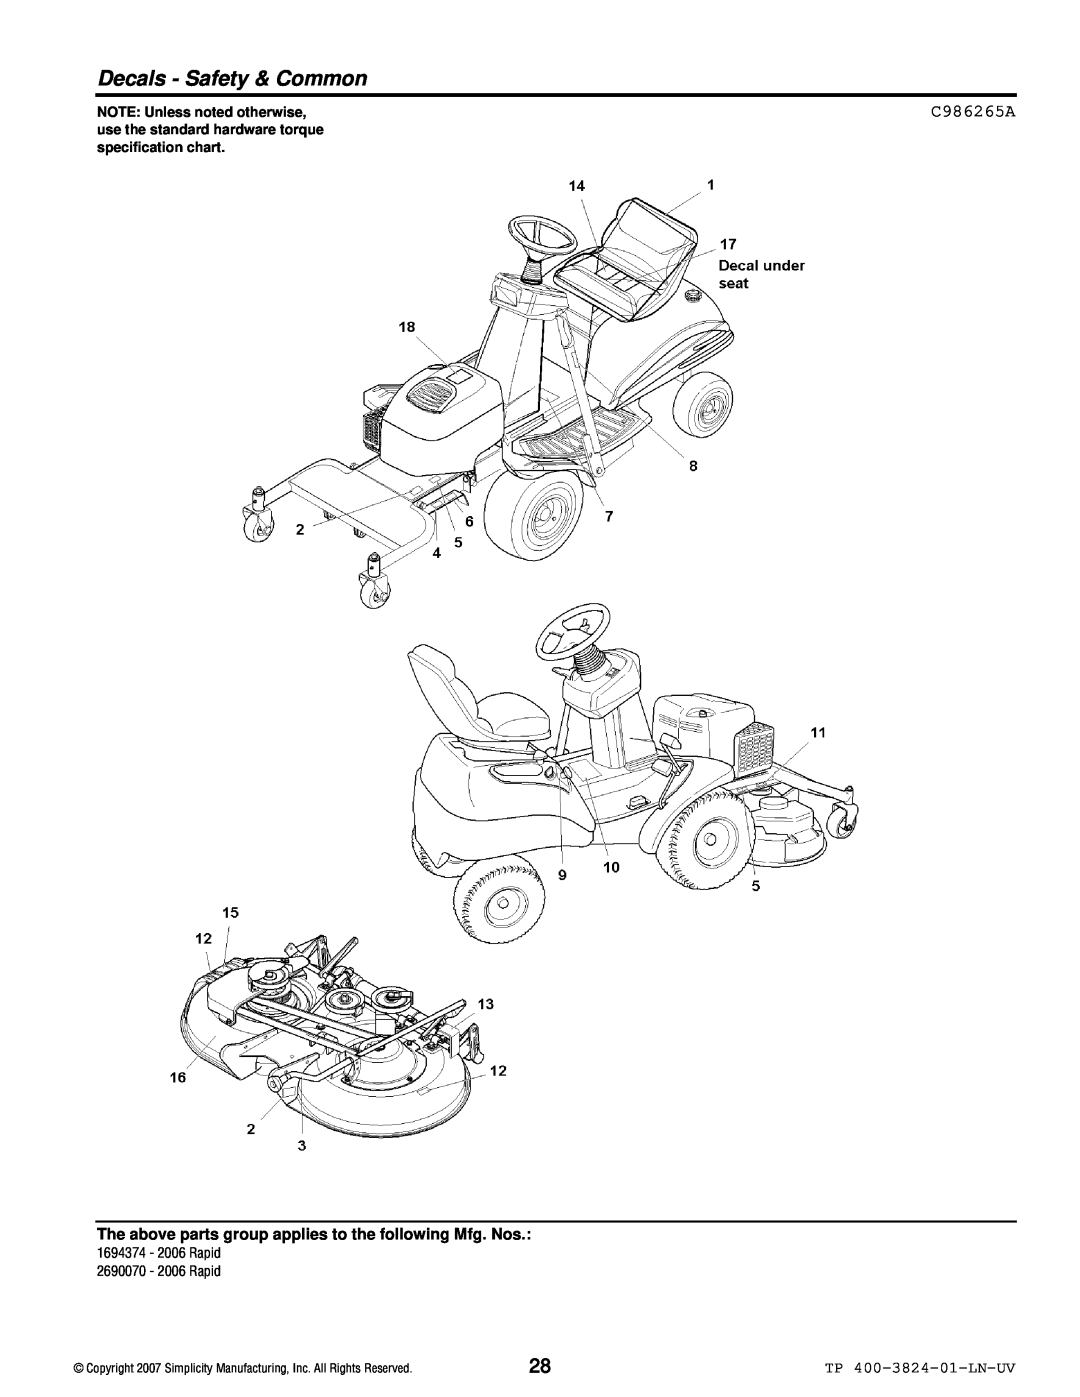 Snapper 2006 Rapid manual Decals - Safety & Common, C986265A, TP 400-3824-01-LN-UV, NOTE: Unless noted otherwise 